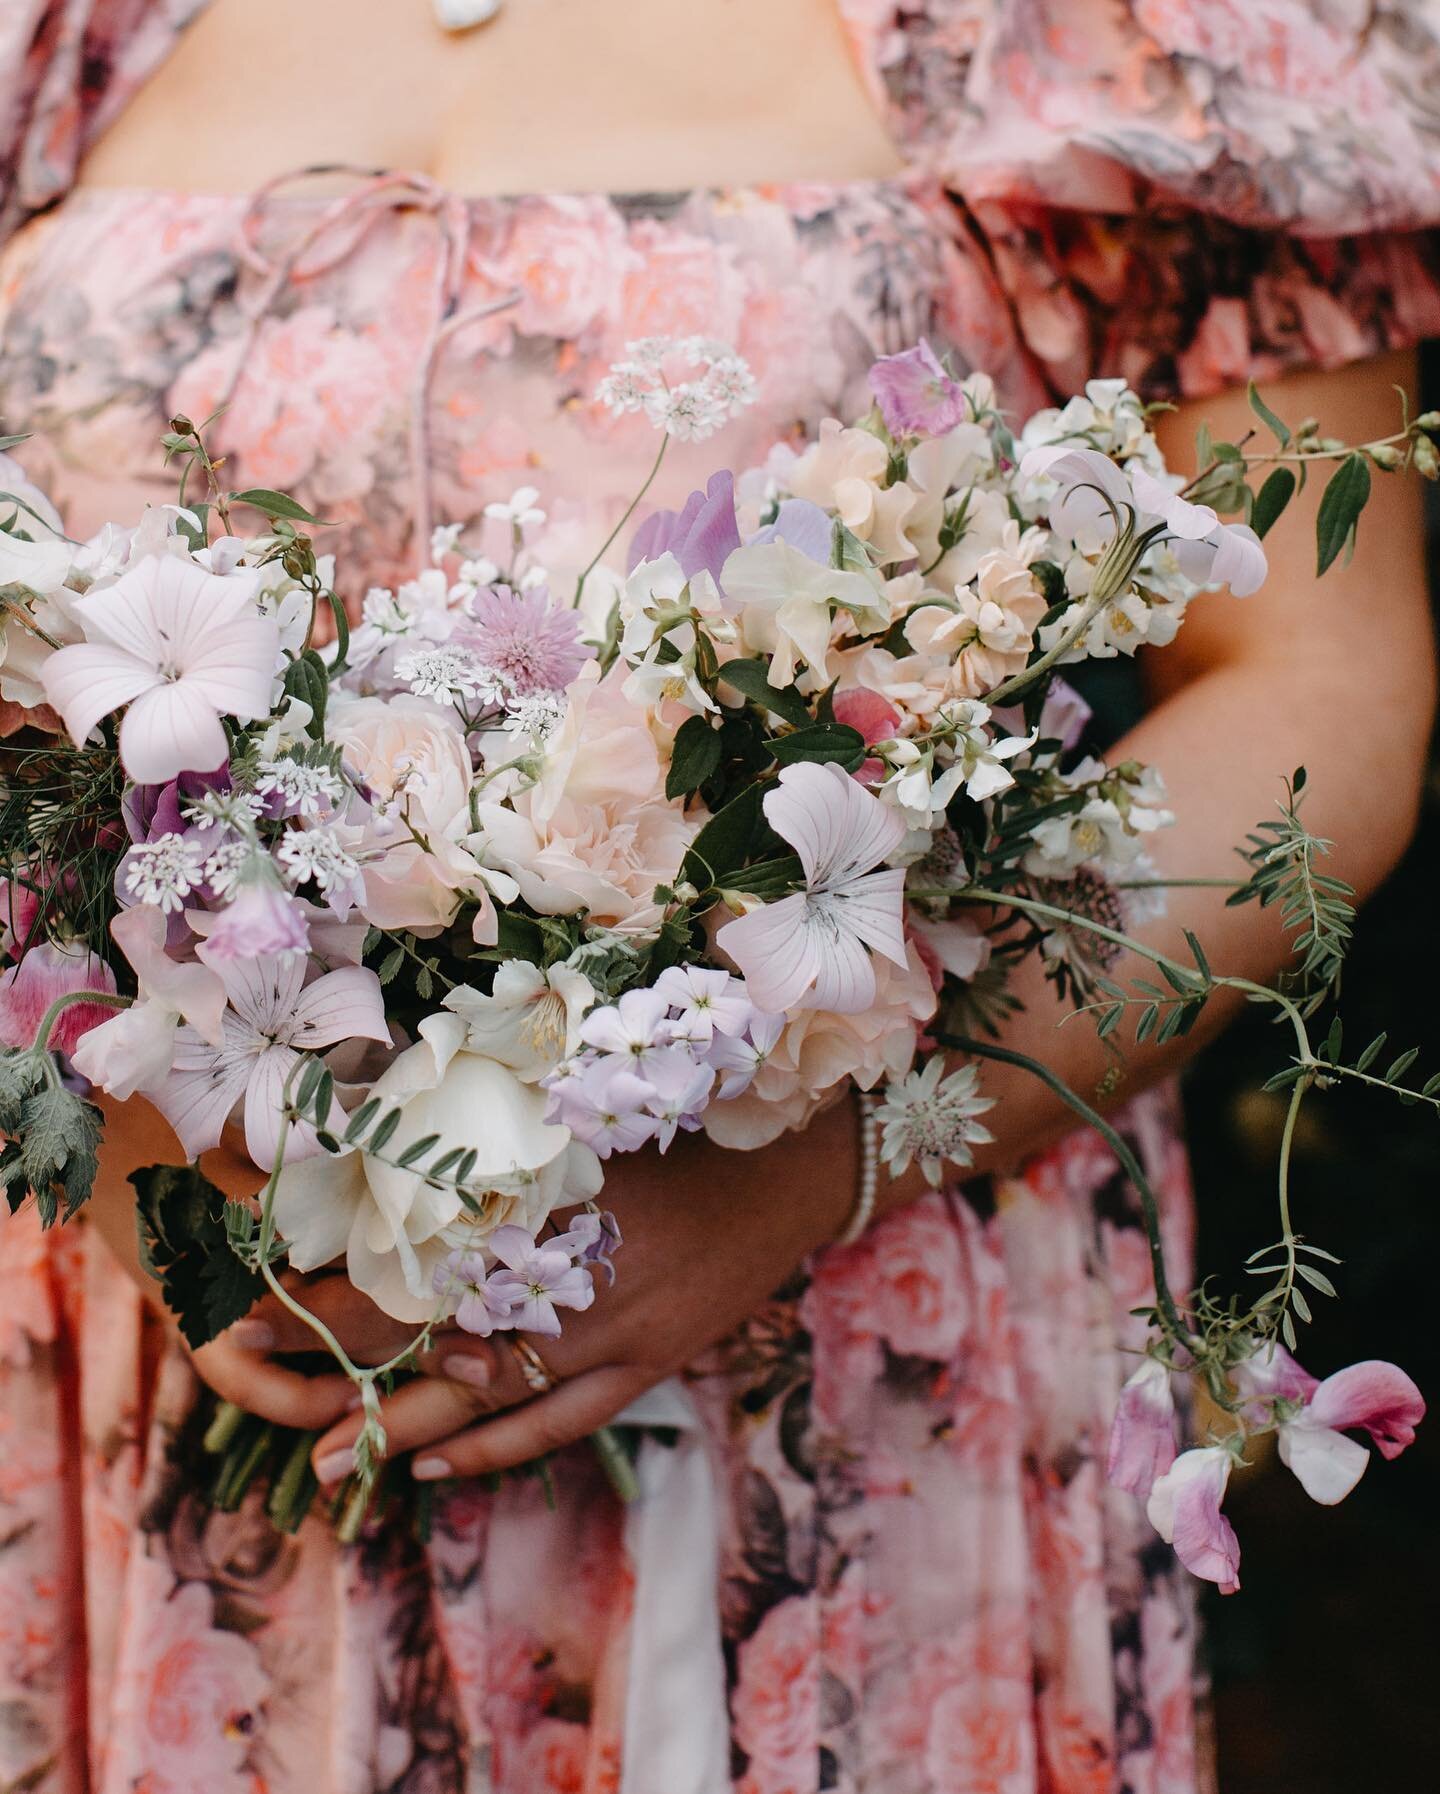 Lauren and Steve, June 2023 ✨

A bouquet full of gorgeous early Summer blooms for flower lover Lauren - blousy roses, frilly sweet peas, fragrant philadelphus and dainty little corncockles. 

London-grown flowers for the perfect London wedding 🌸

Ca